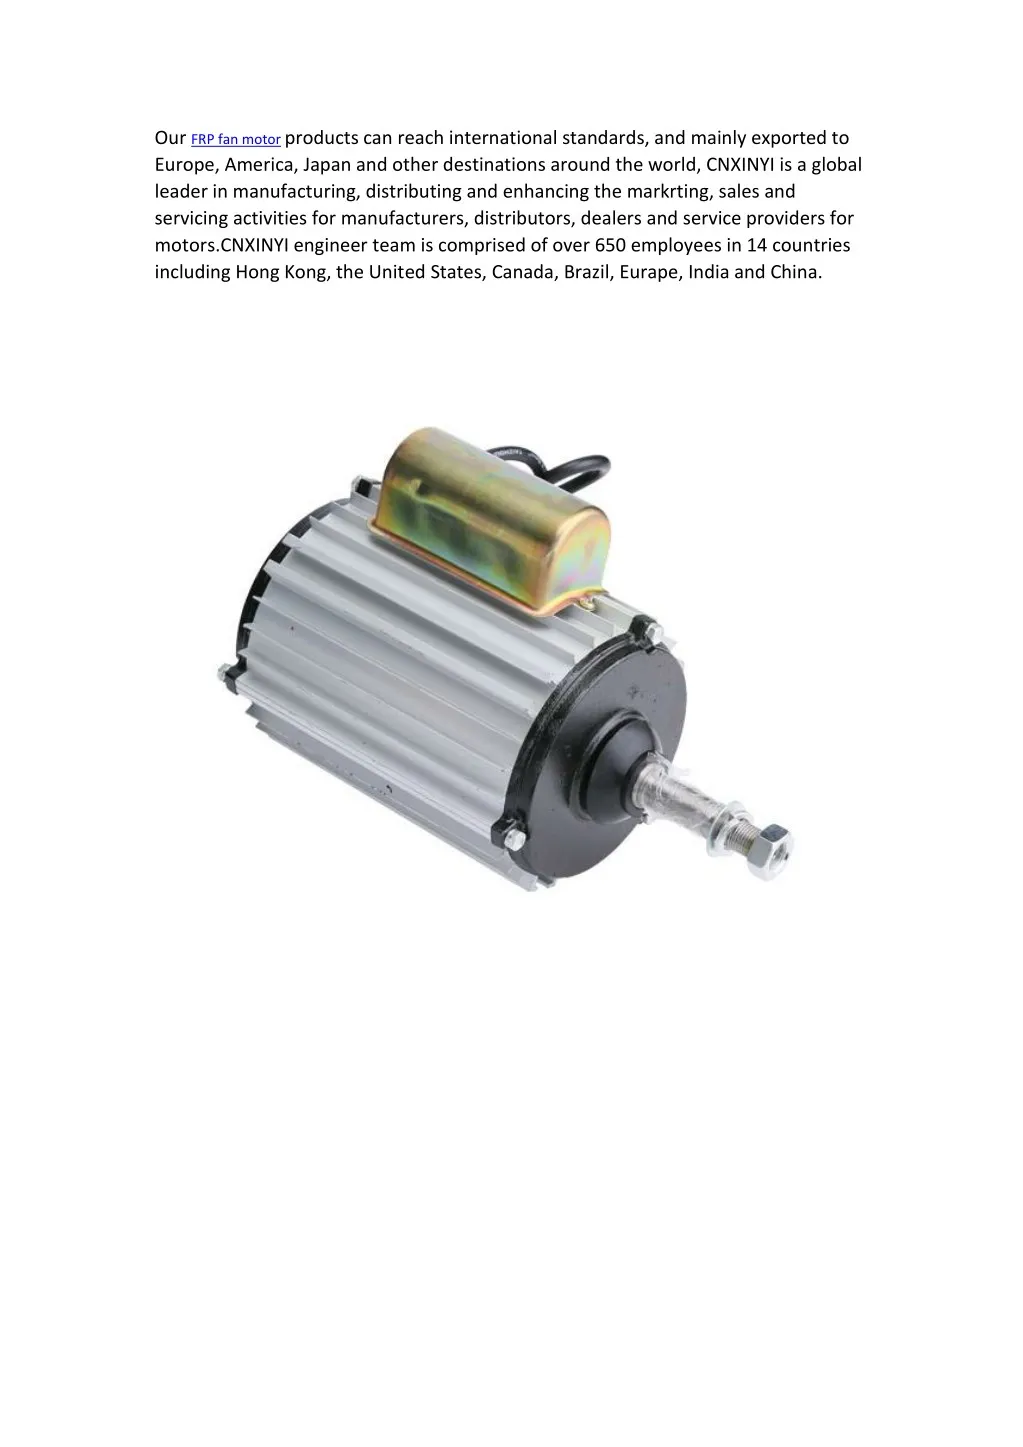 our frp fan motor products can reach